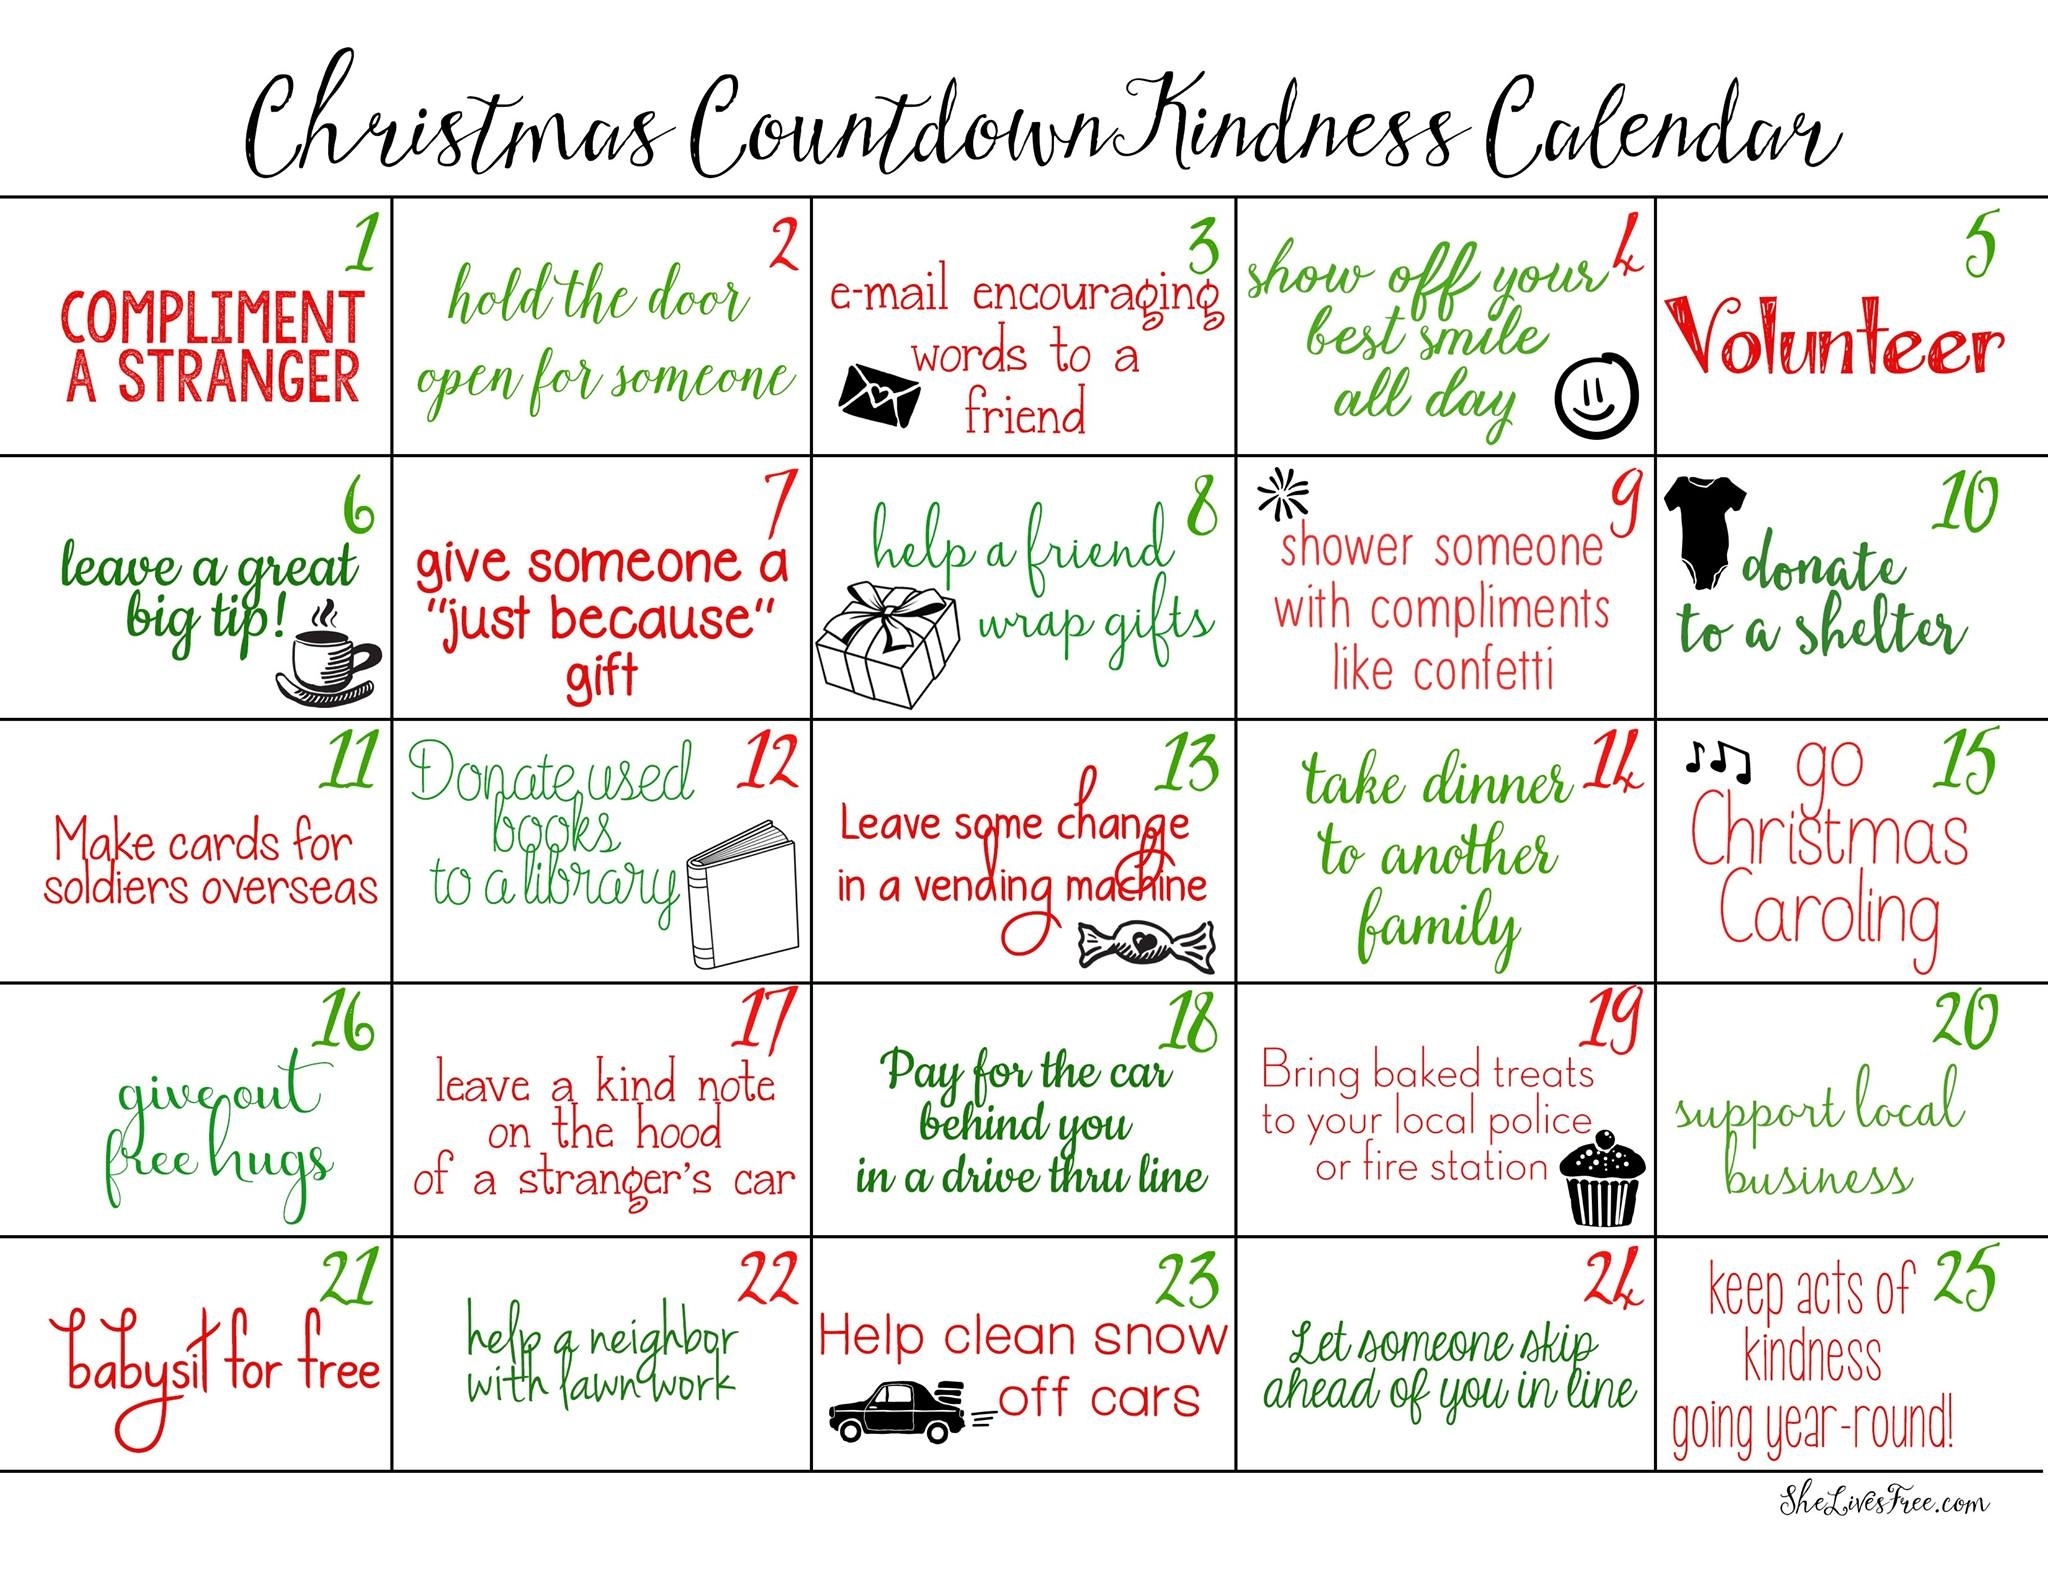 Acts Of Kindness Christmas Countdown Calendars (Free Printables) Countdown Calendar To End Of Year